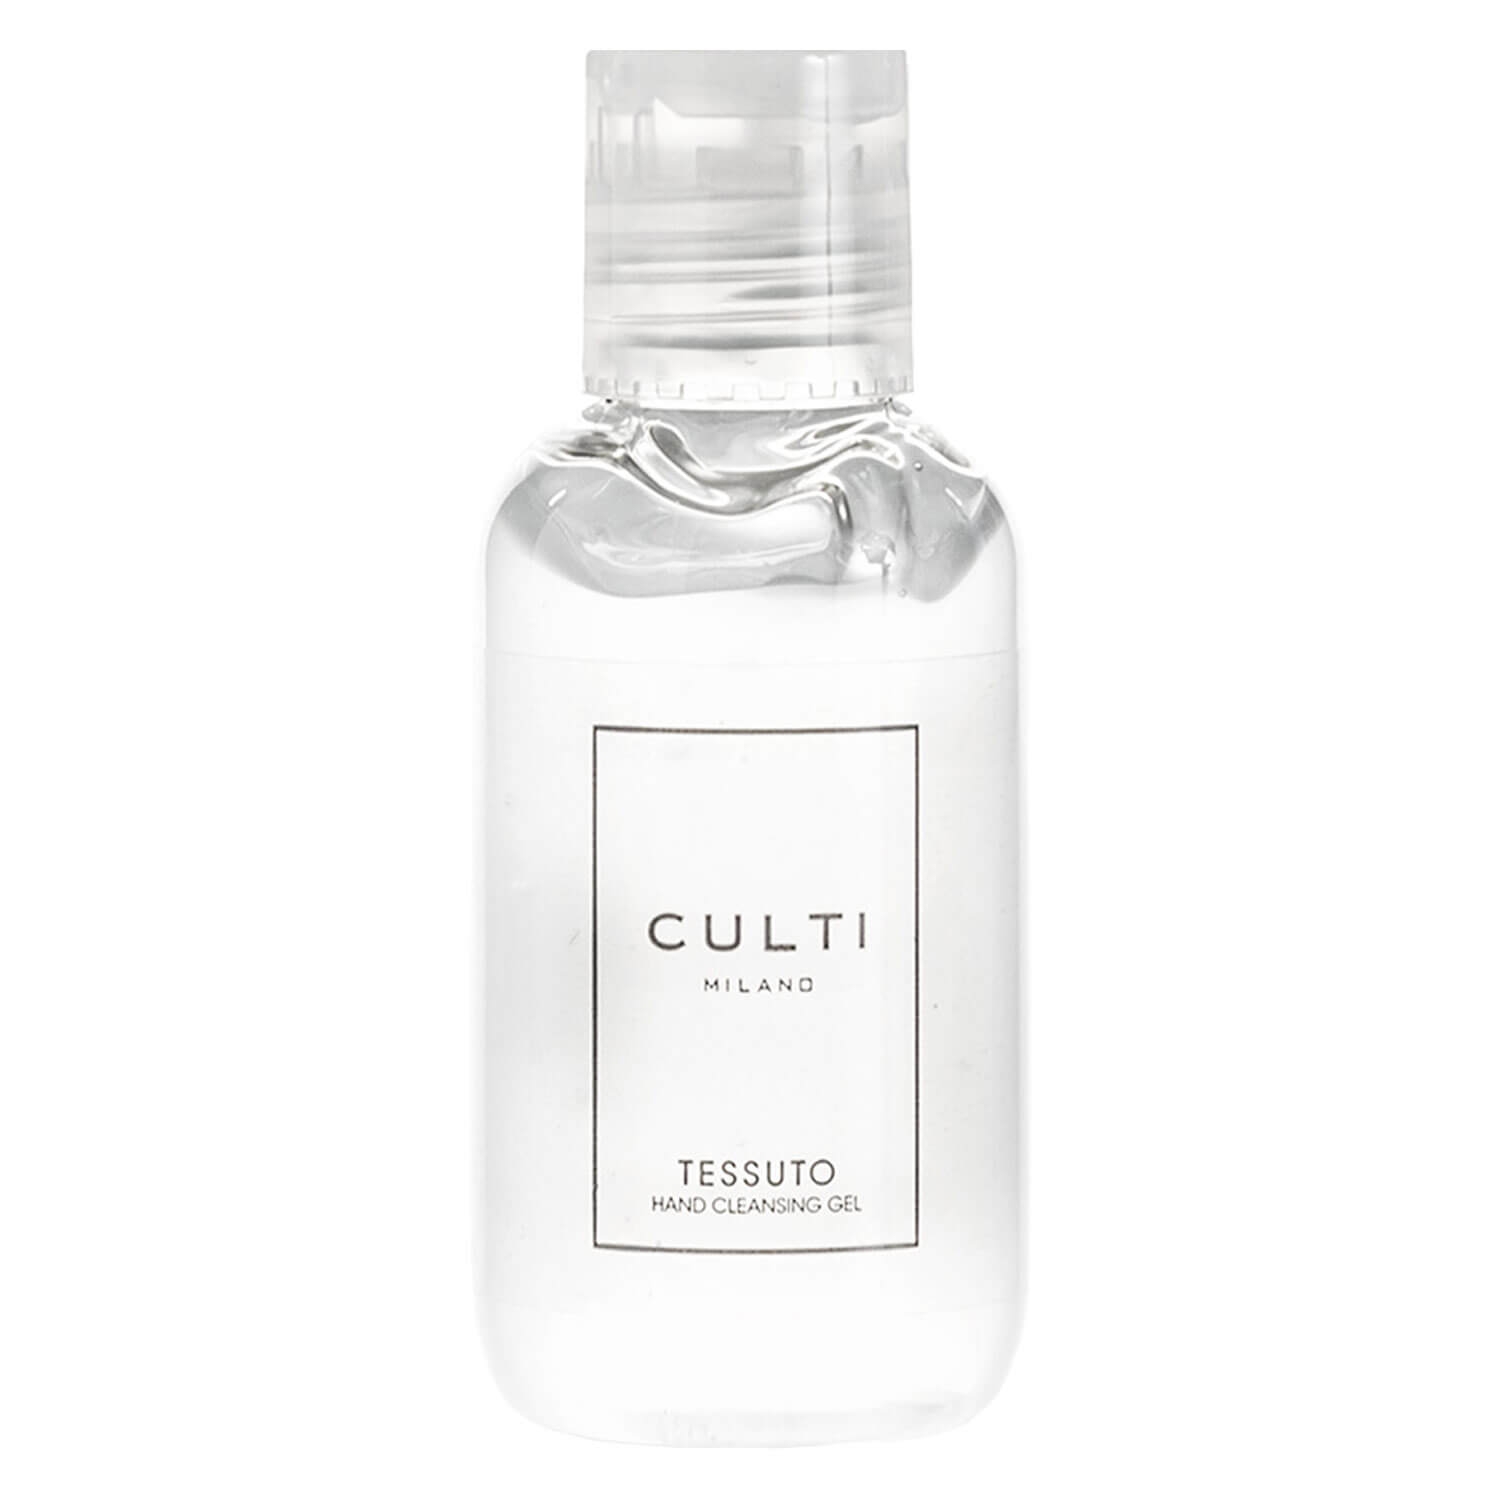 Product image from CULTI Sanitizer - Hand Cleansing Gel Tessuto